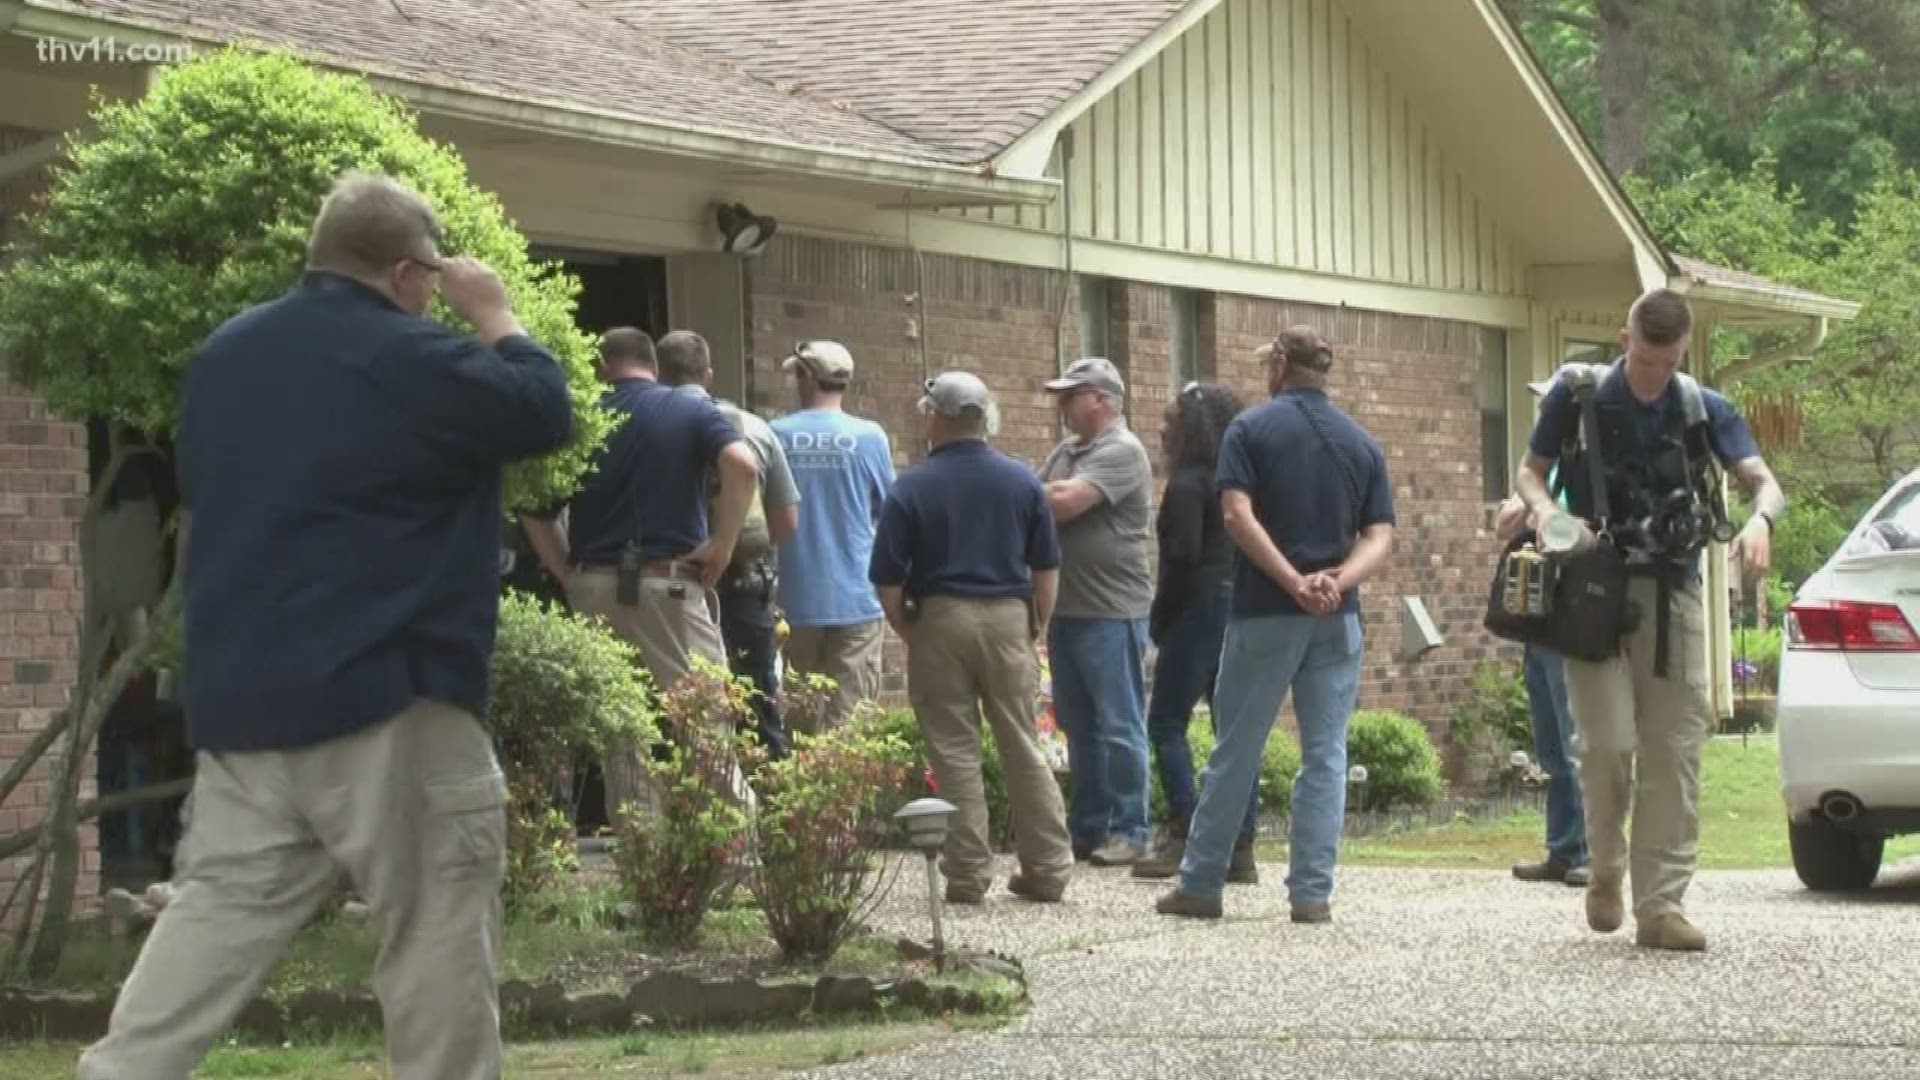 People in Lonoke are dealing with an odd occurrence. Some homes are registering low oxygen levels.